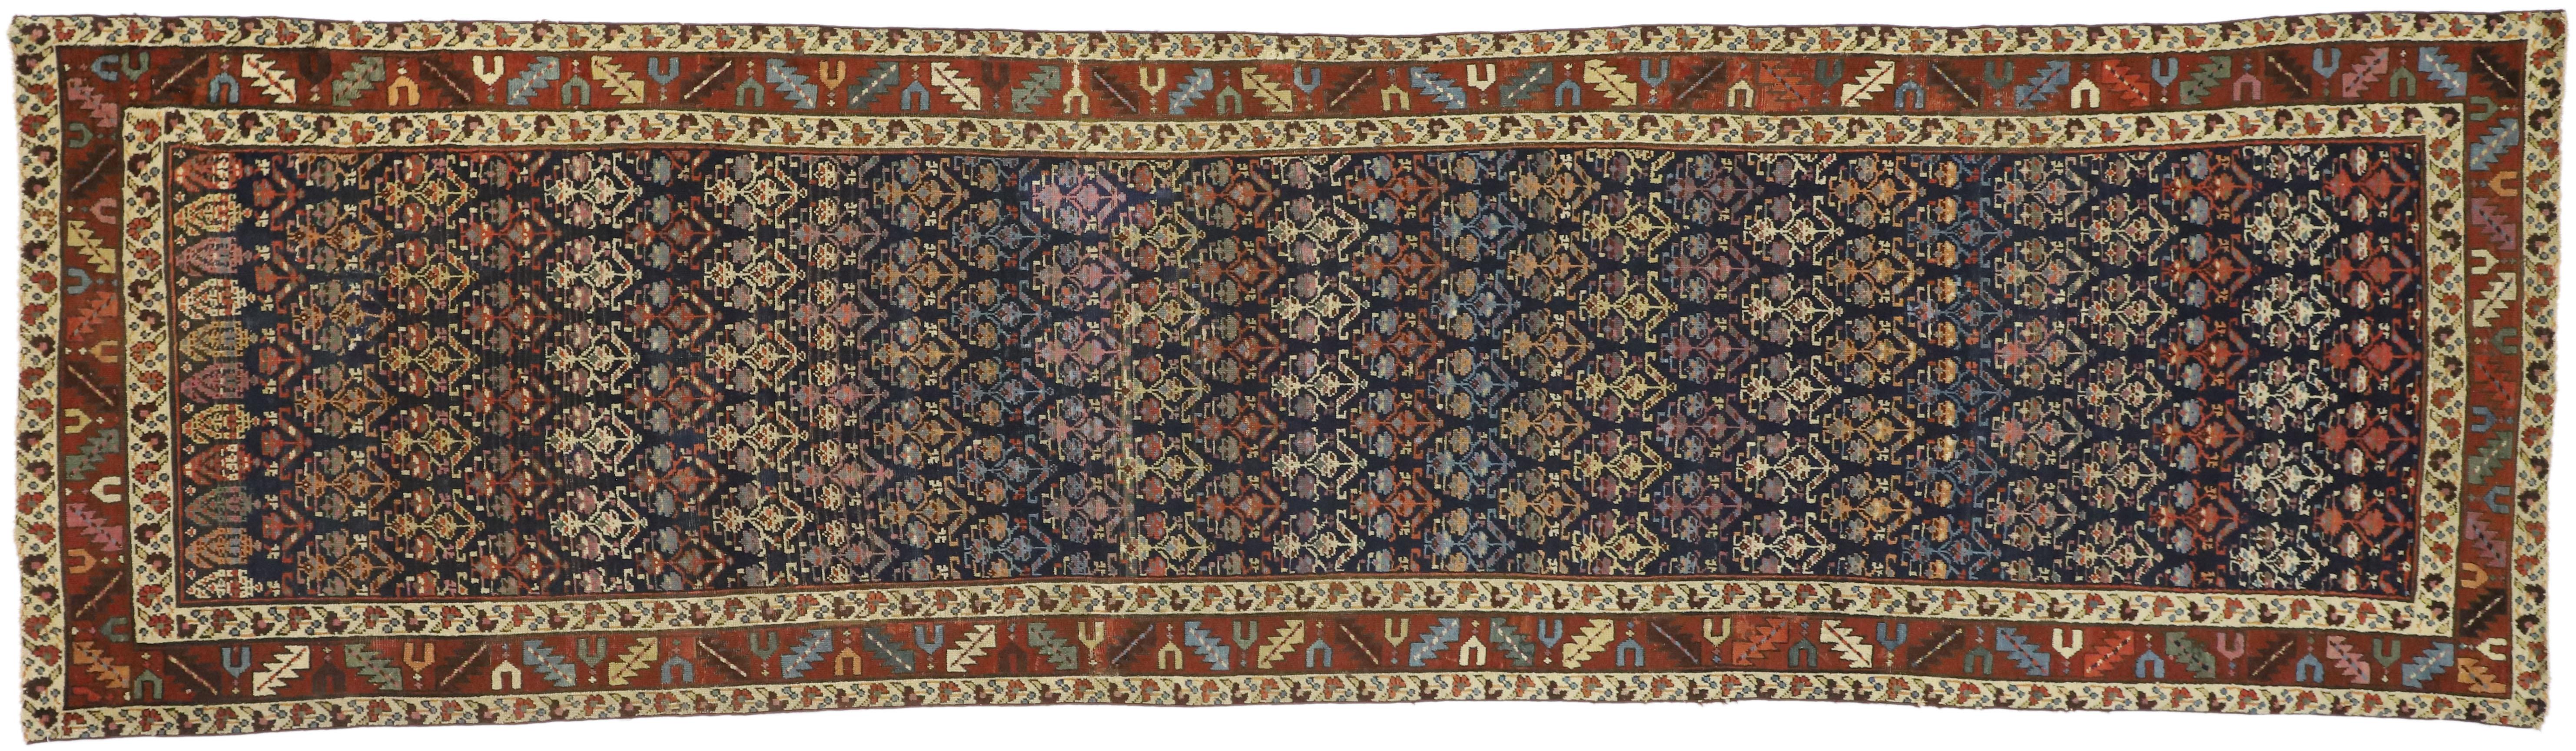 Antique Caucasian Shirvan Runner with Boteh Pattern and Modern Federal Style For Sale 2